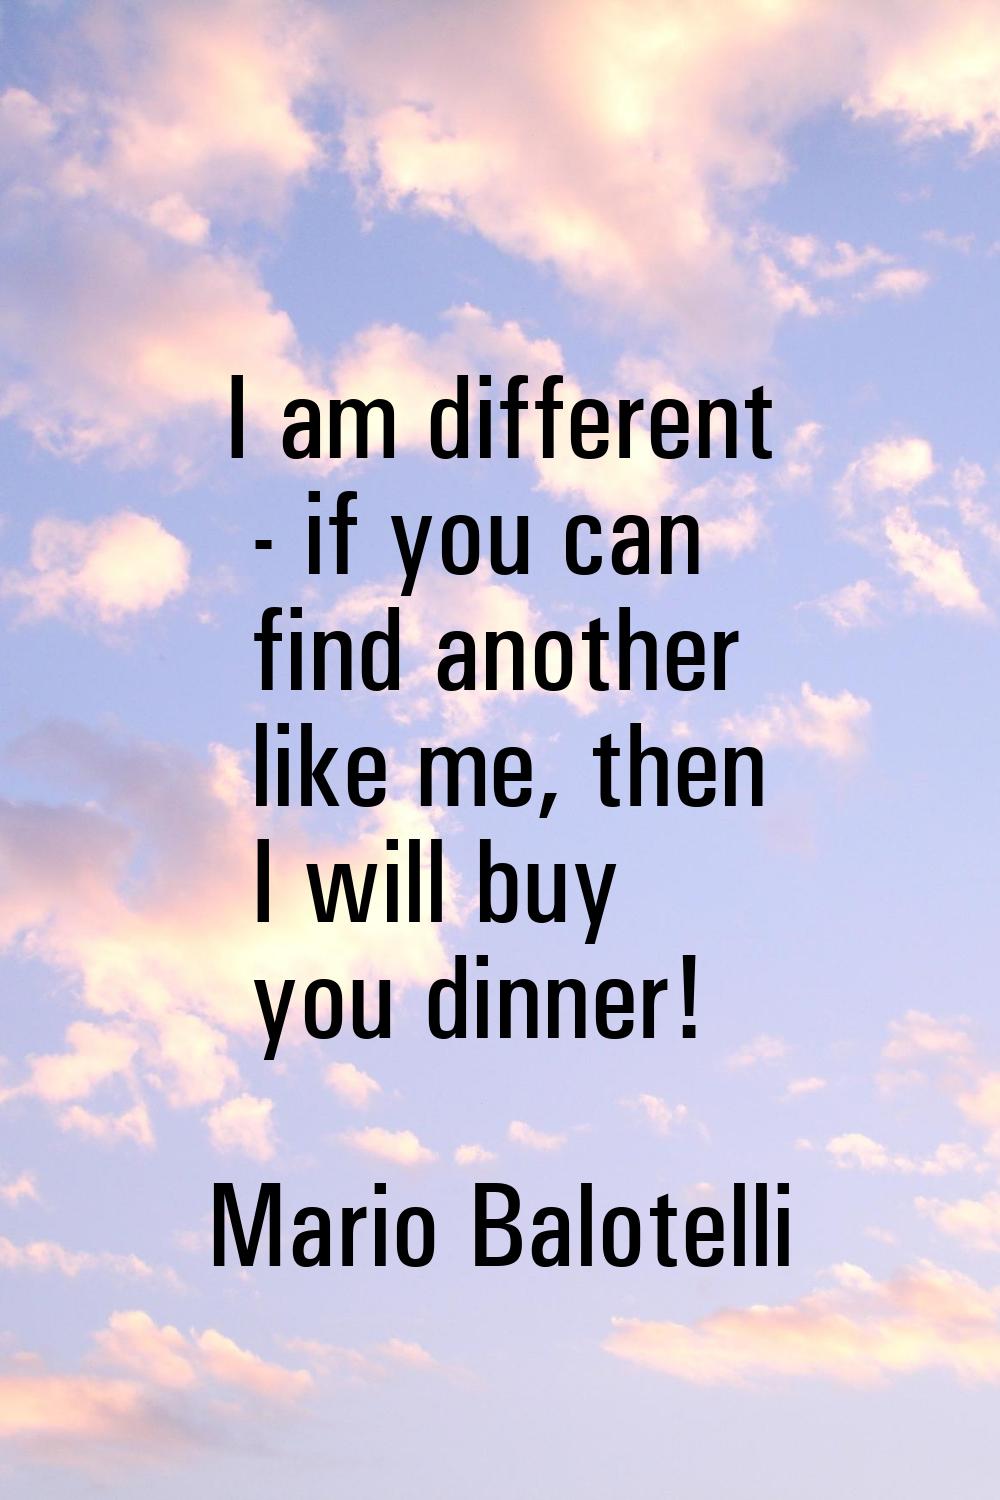 I am different - if you can find another like me, then I will buy you dinner!